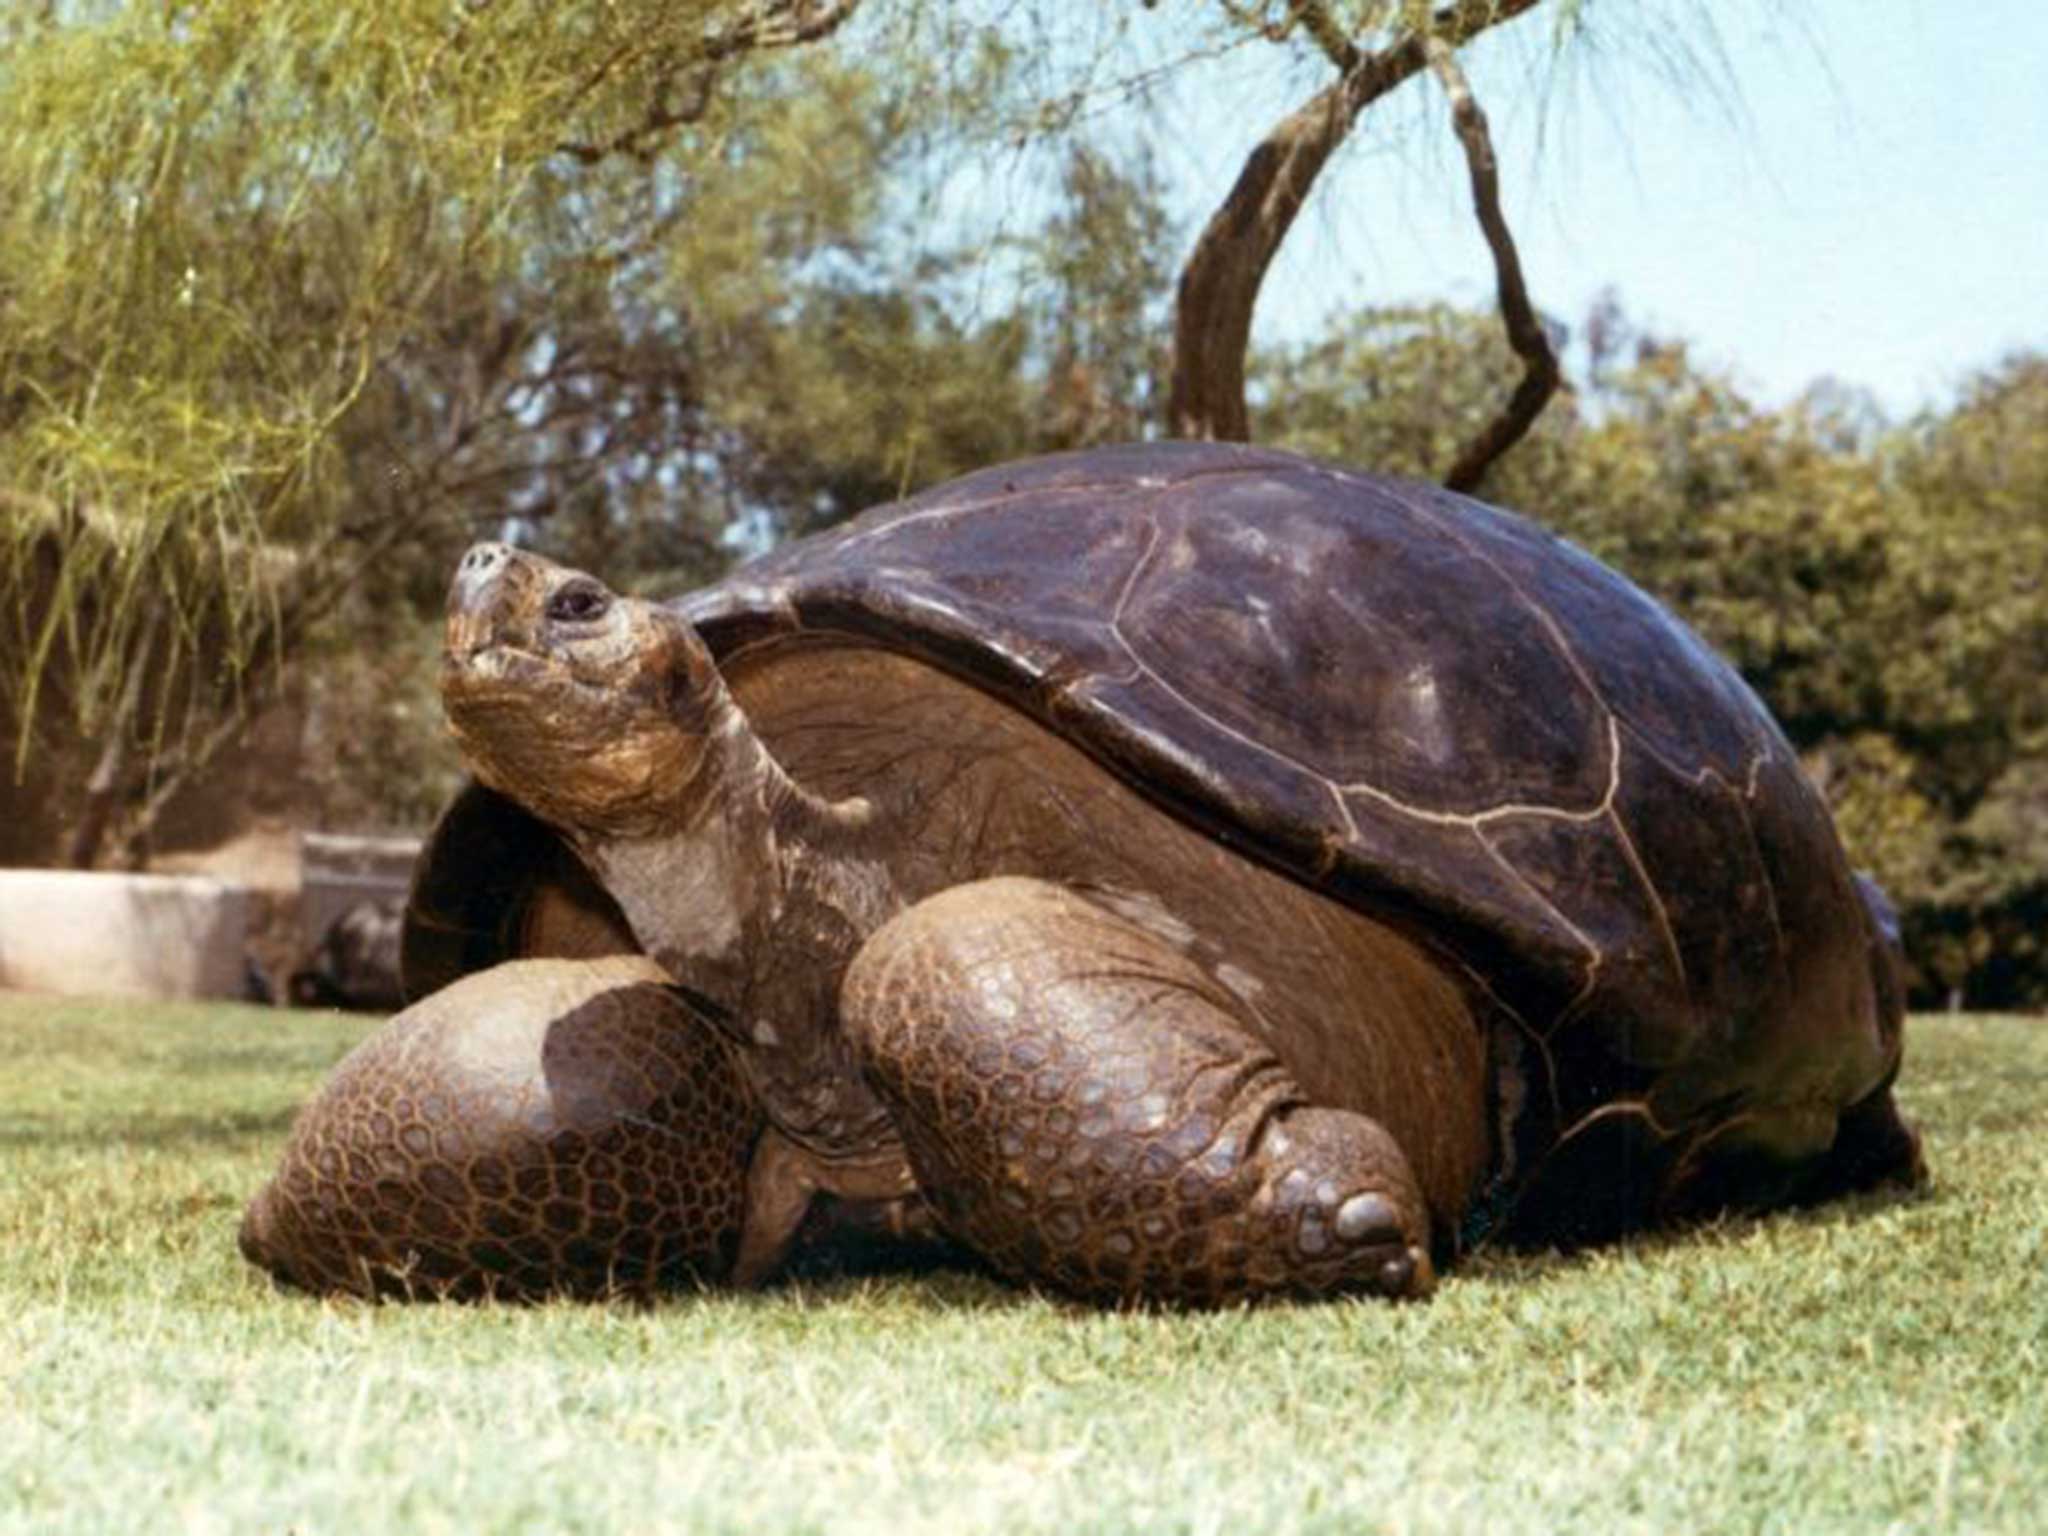 Galapagos Island tortoise Speed put down by zookeepers at 150